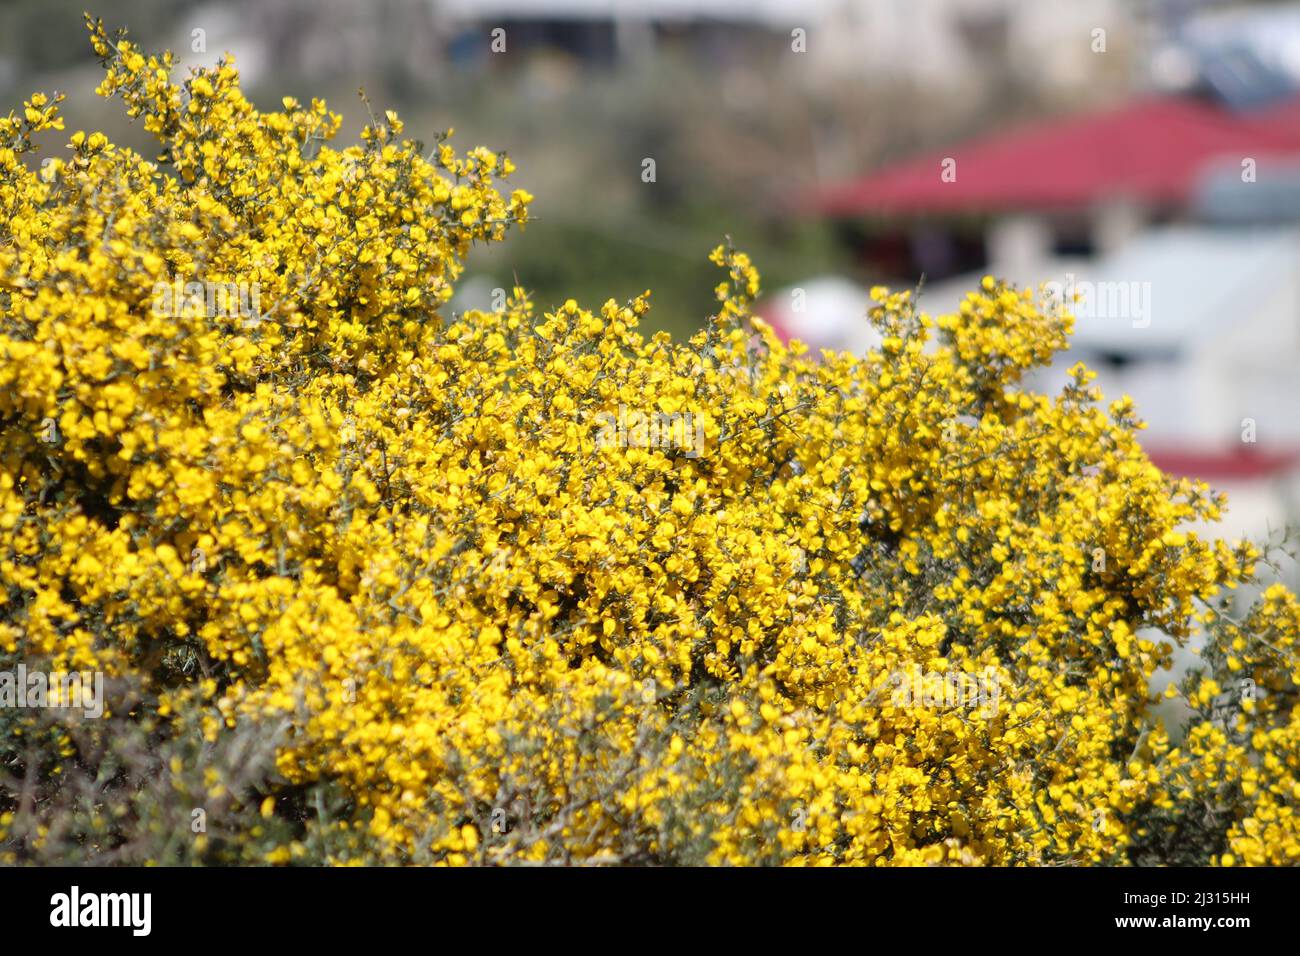 Yellow (Scotch broom or cytisus scoparius) flower with blurred village view background. Stock Photo